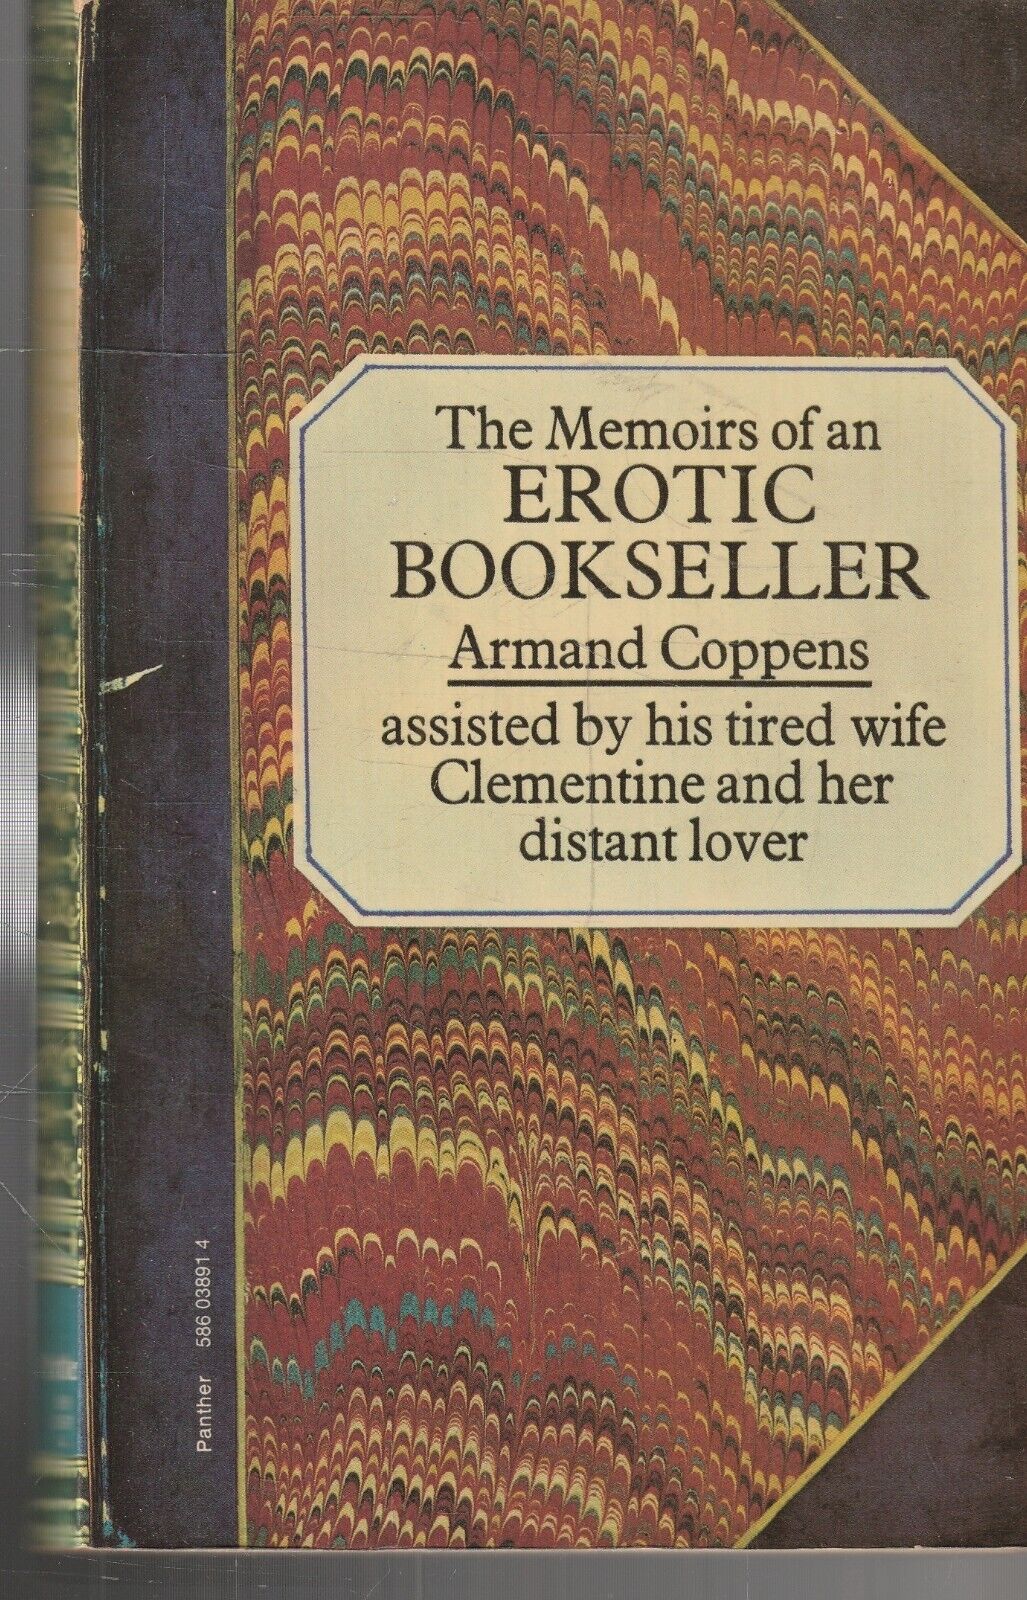 MEMORABILIA ,THE MEMOIRS OF AN EROTIC BOOKSELLER by ARMAND COPPENS